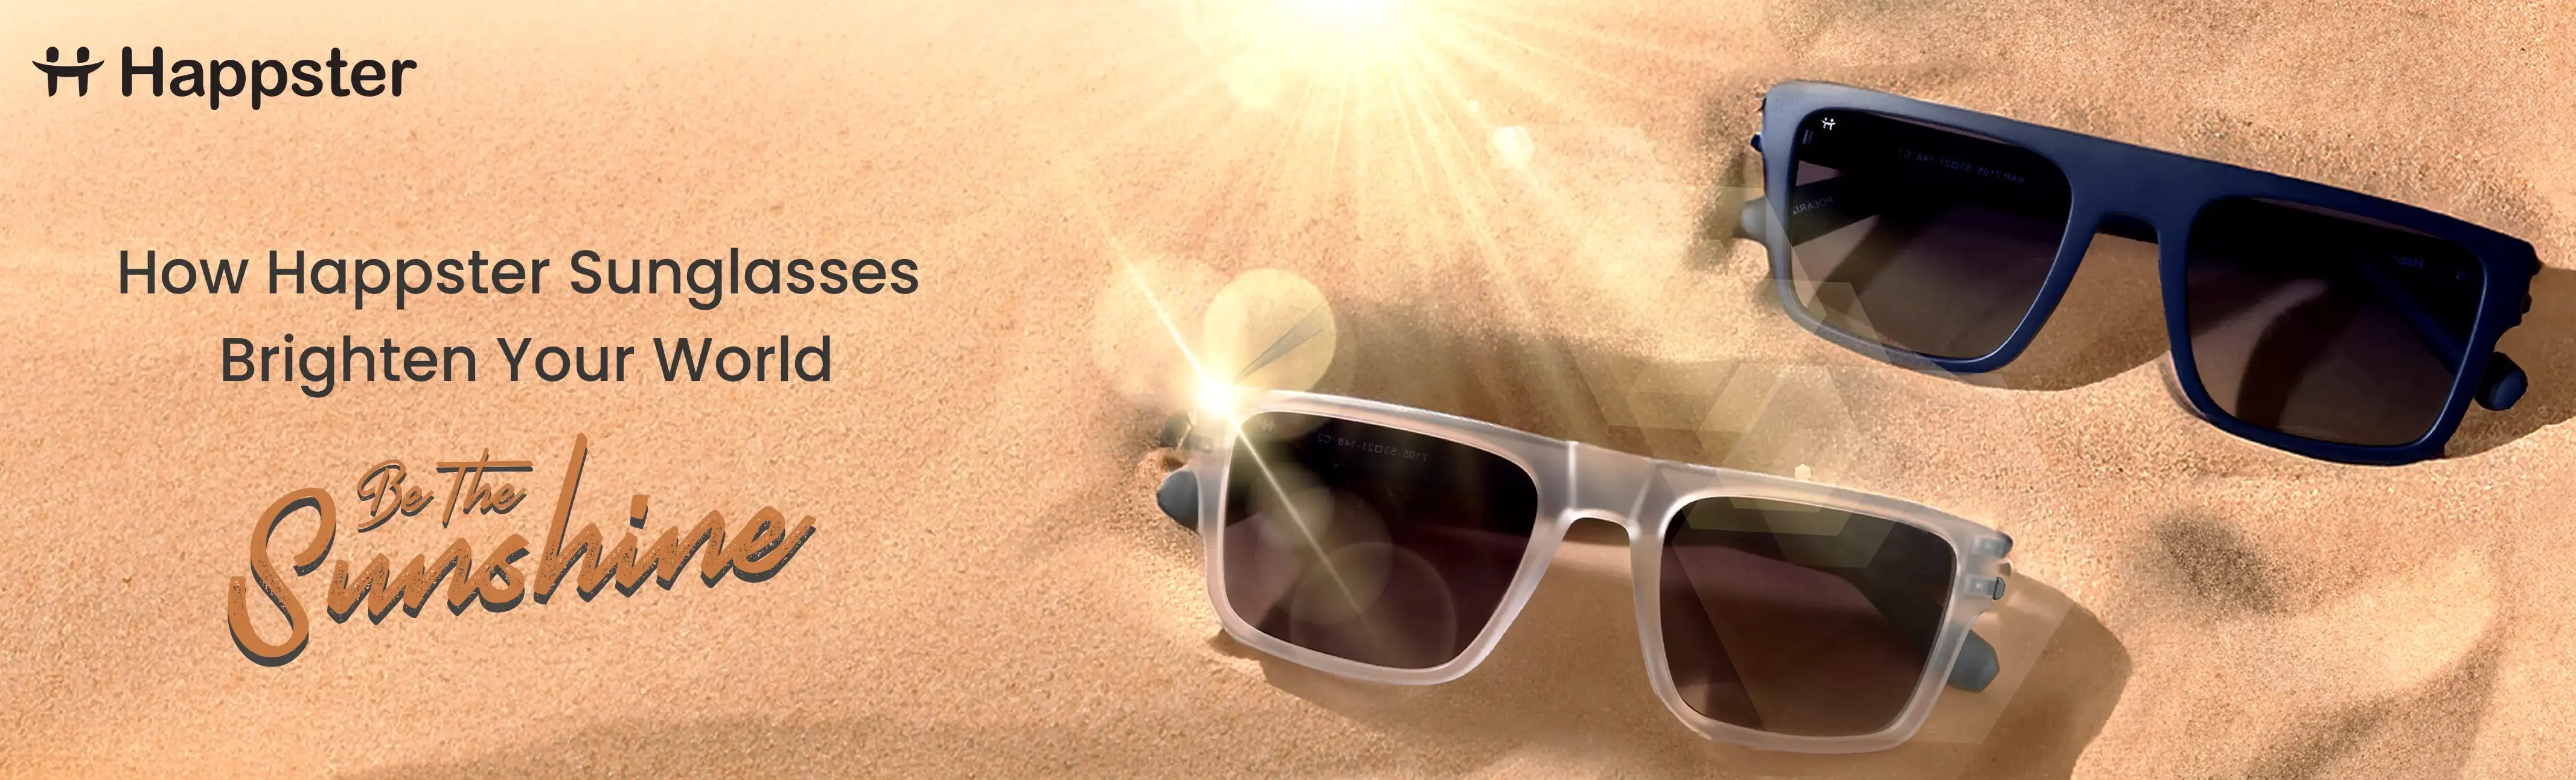 Be the Sunshine - How Happster Sunglasses Brighten Your World